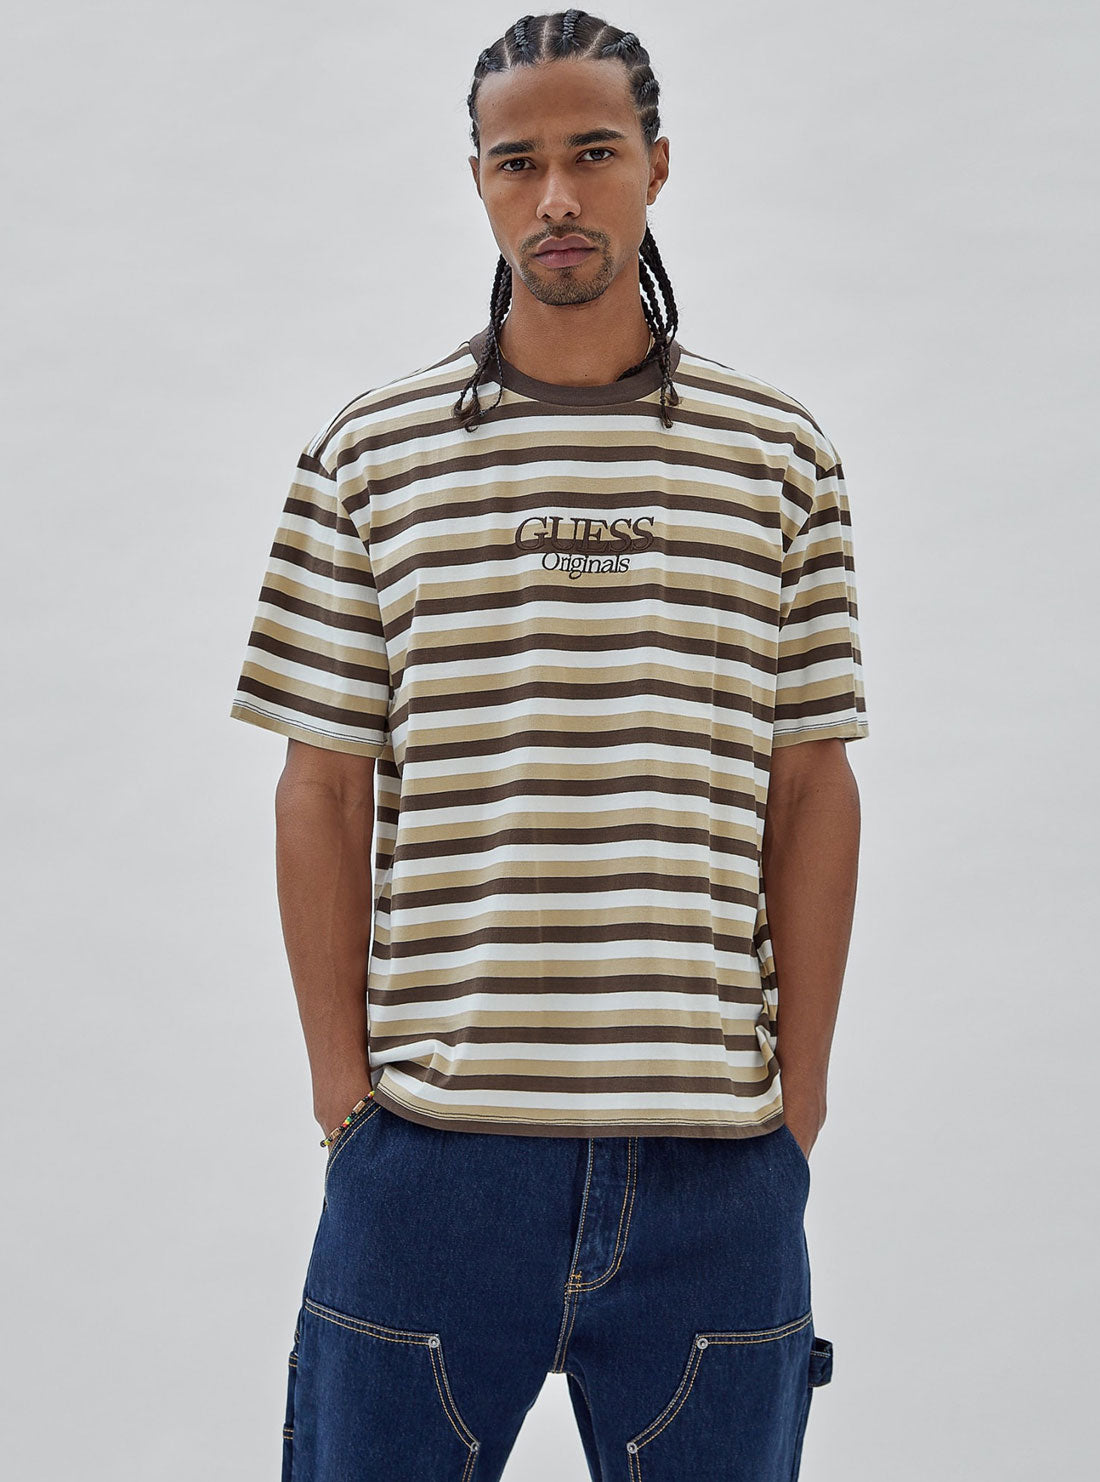 Guess Originals Eco Brown and White Striped T-Shirt | GUESS Men's Apparel | front view